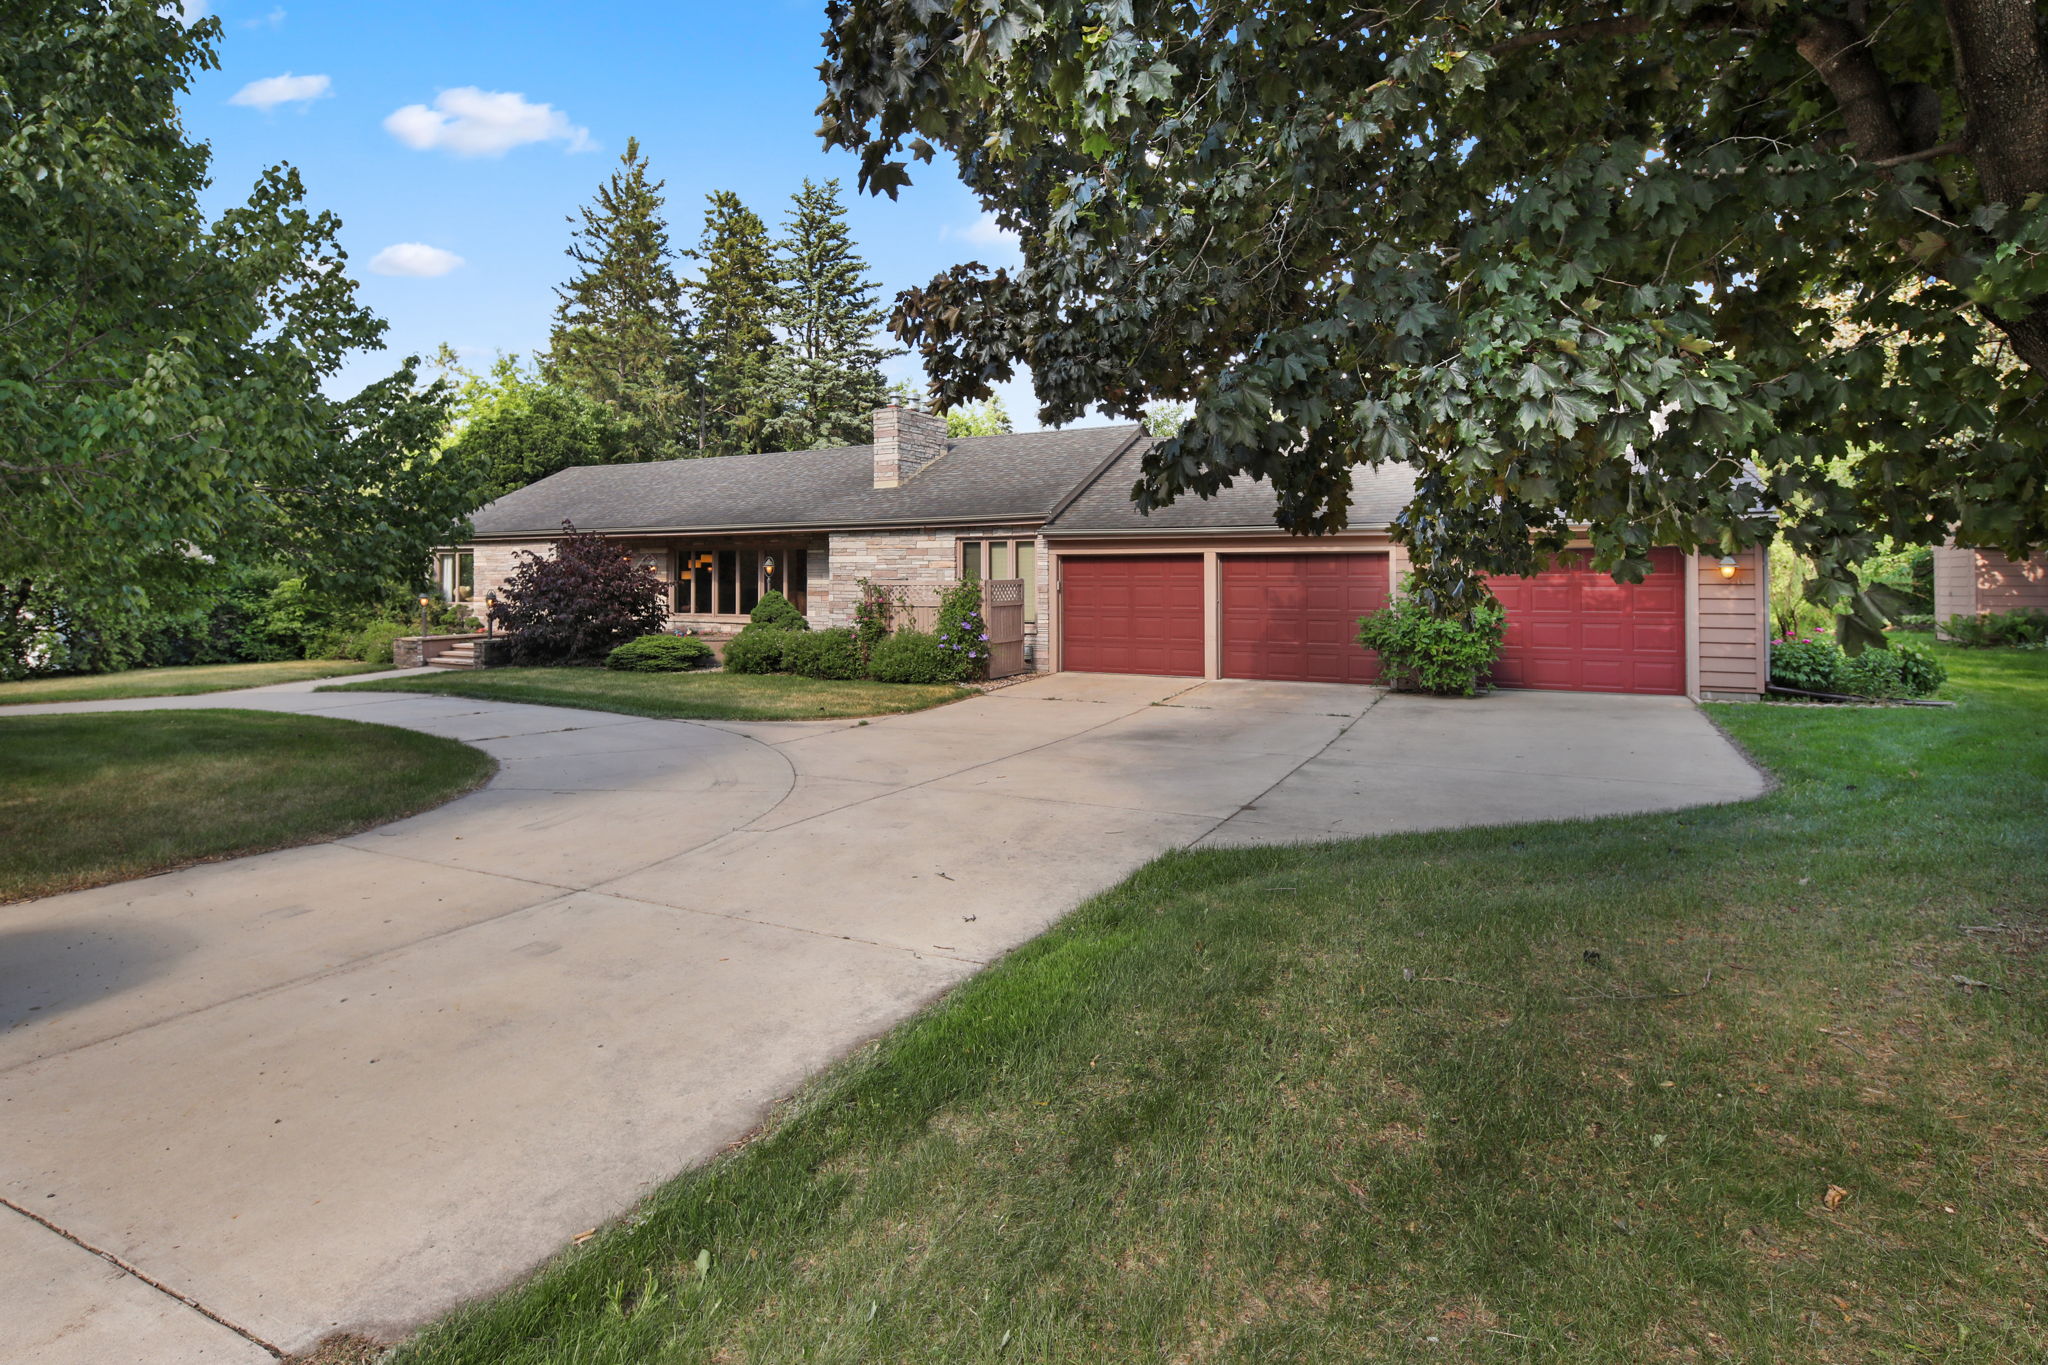  1310 Cooper Ave S, St. Cloud, MN 56301, US Photo 3